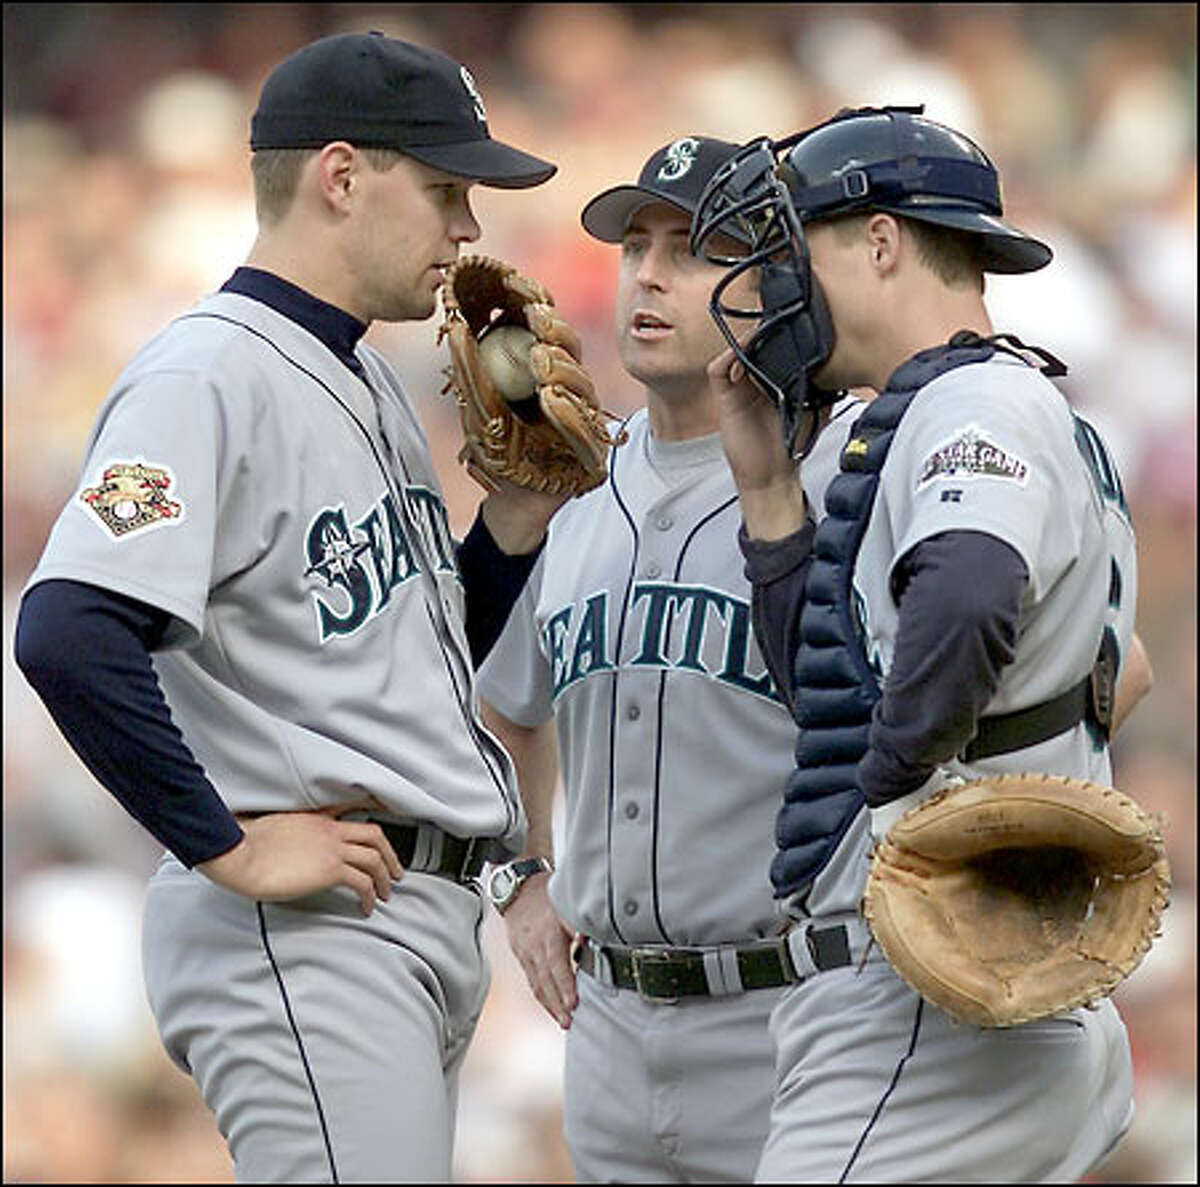 Pitching coach Bryan Price (center) talks to Aaron Sele (left) and Dan Wilson in the second inning after an Indians score.